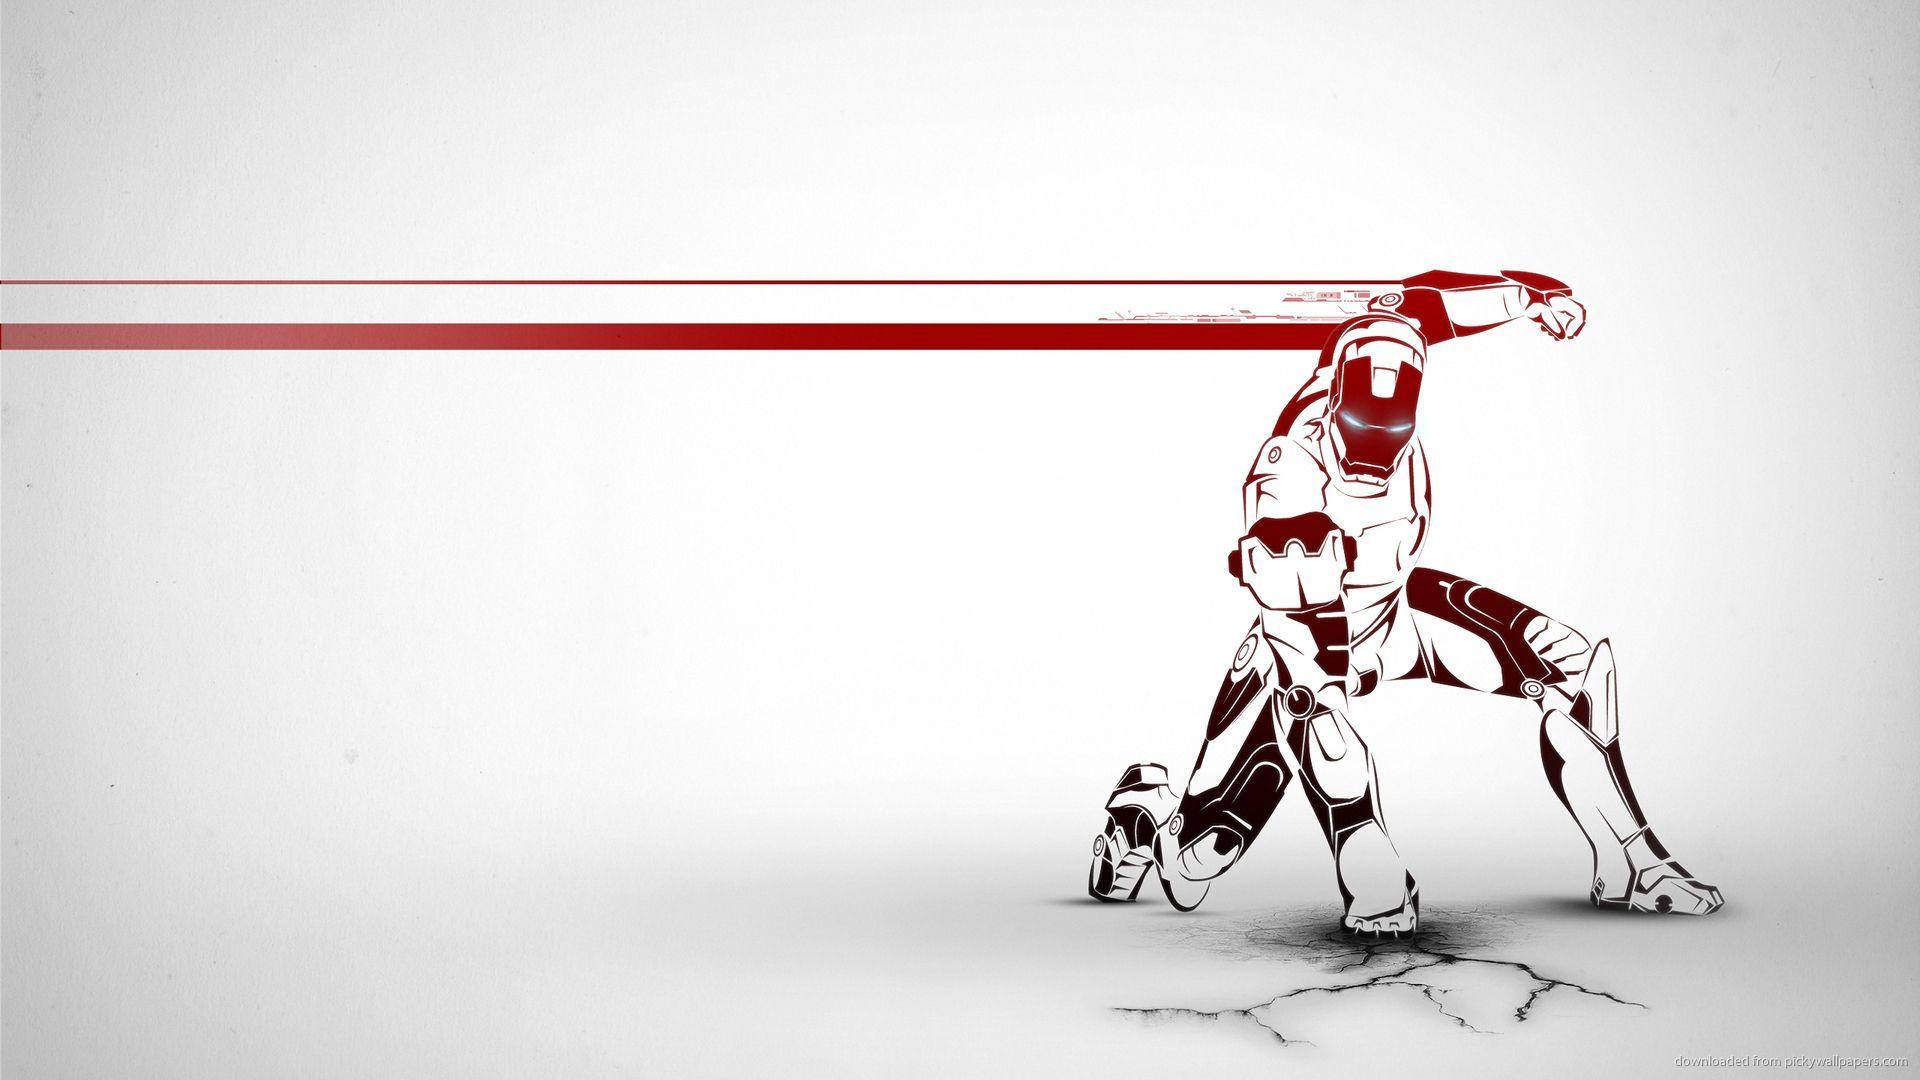 Download 1920x1080 Iron Man Awesome Red Art Wallpaper